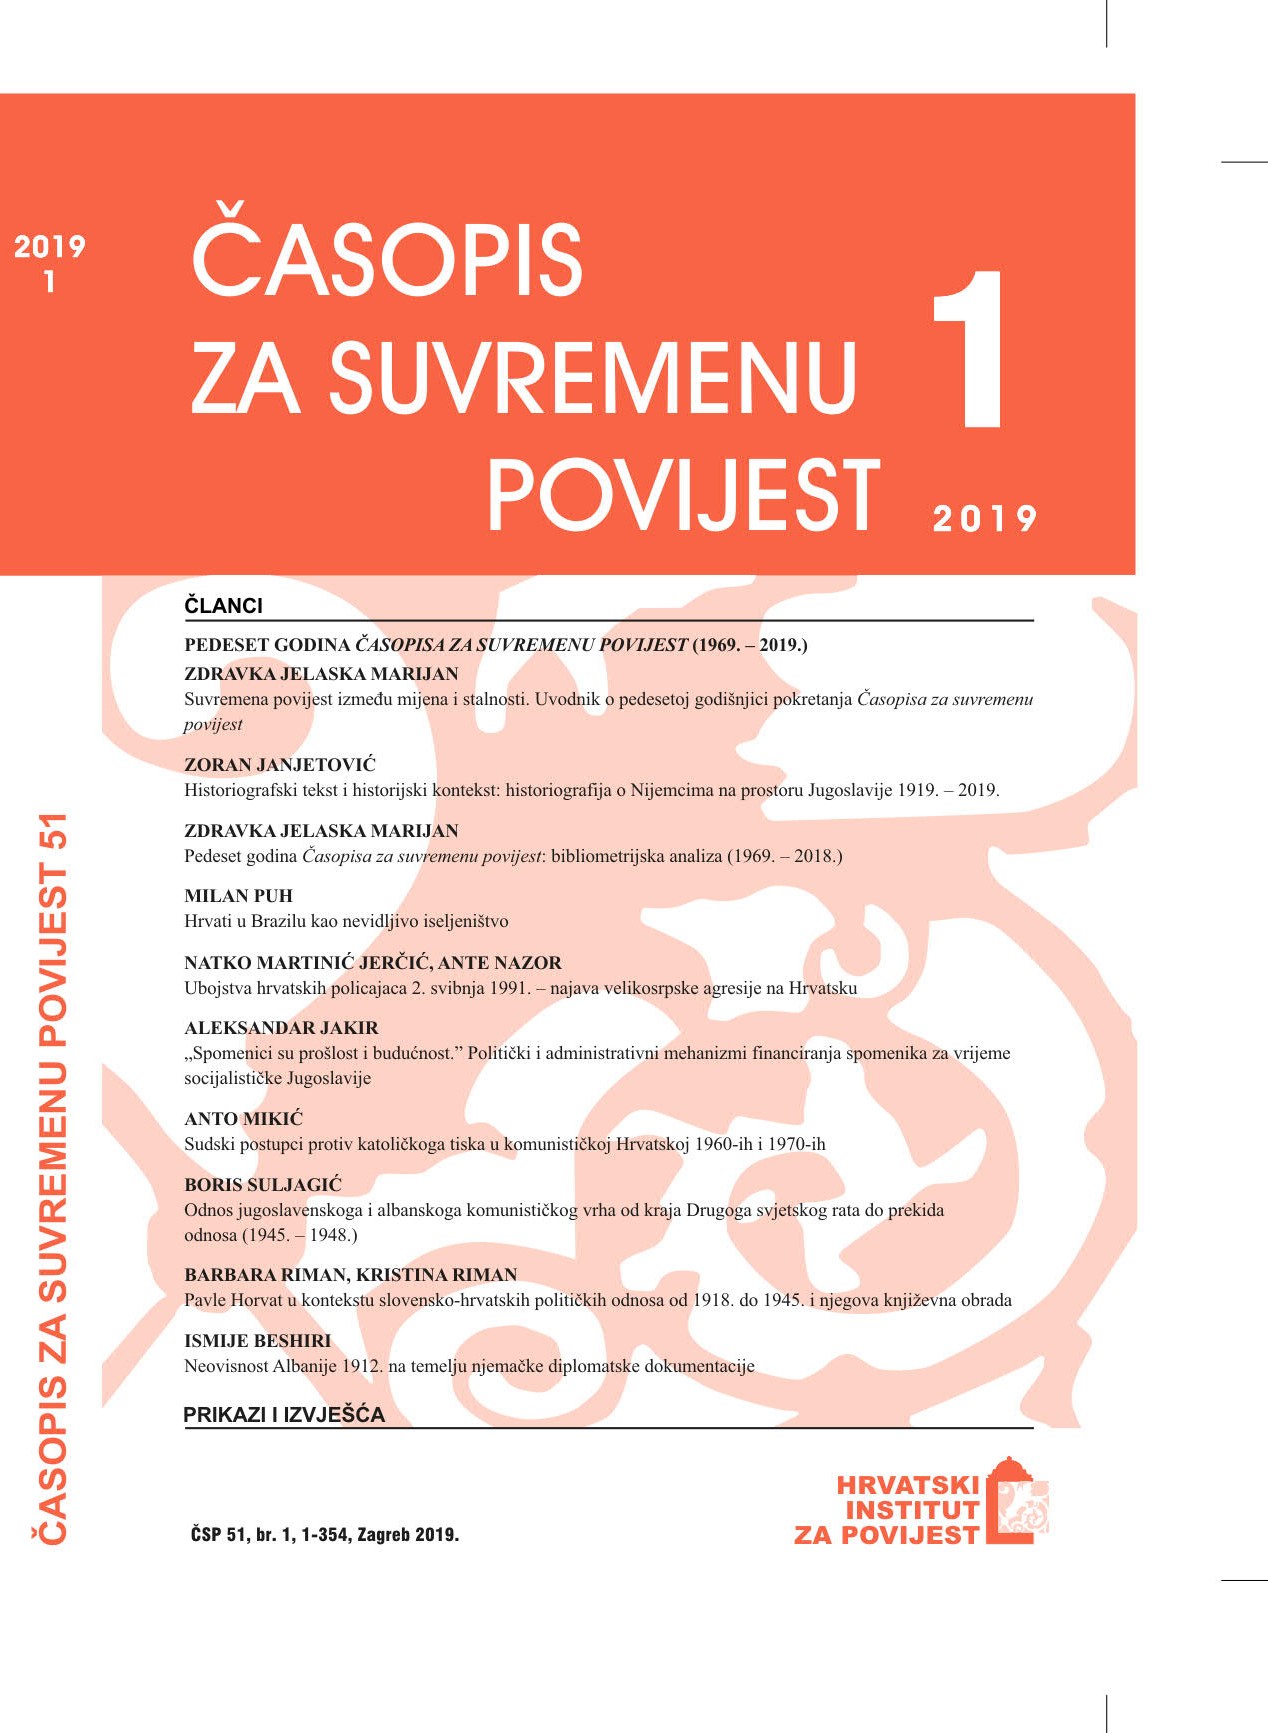 “Monuments are the Past and the Future”. Political and Administrative Mechanisms of Financing Monuments during Socialist Yugoslavia Cover Image